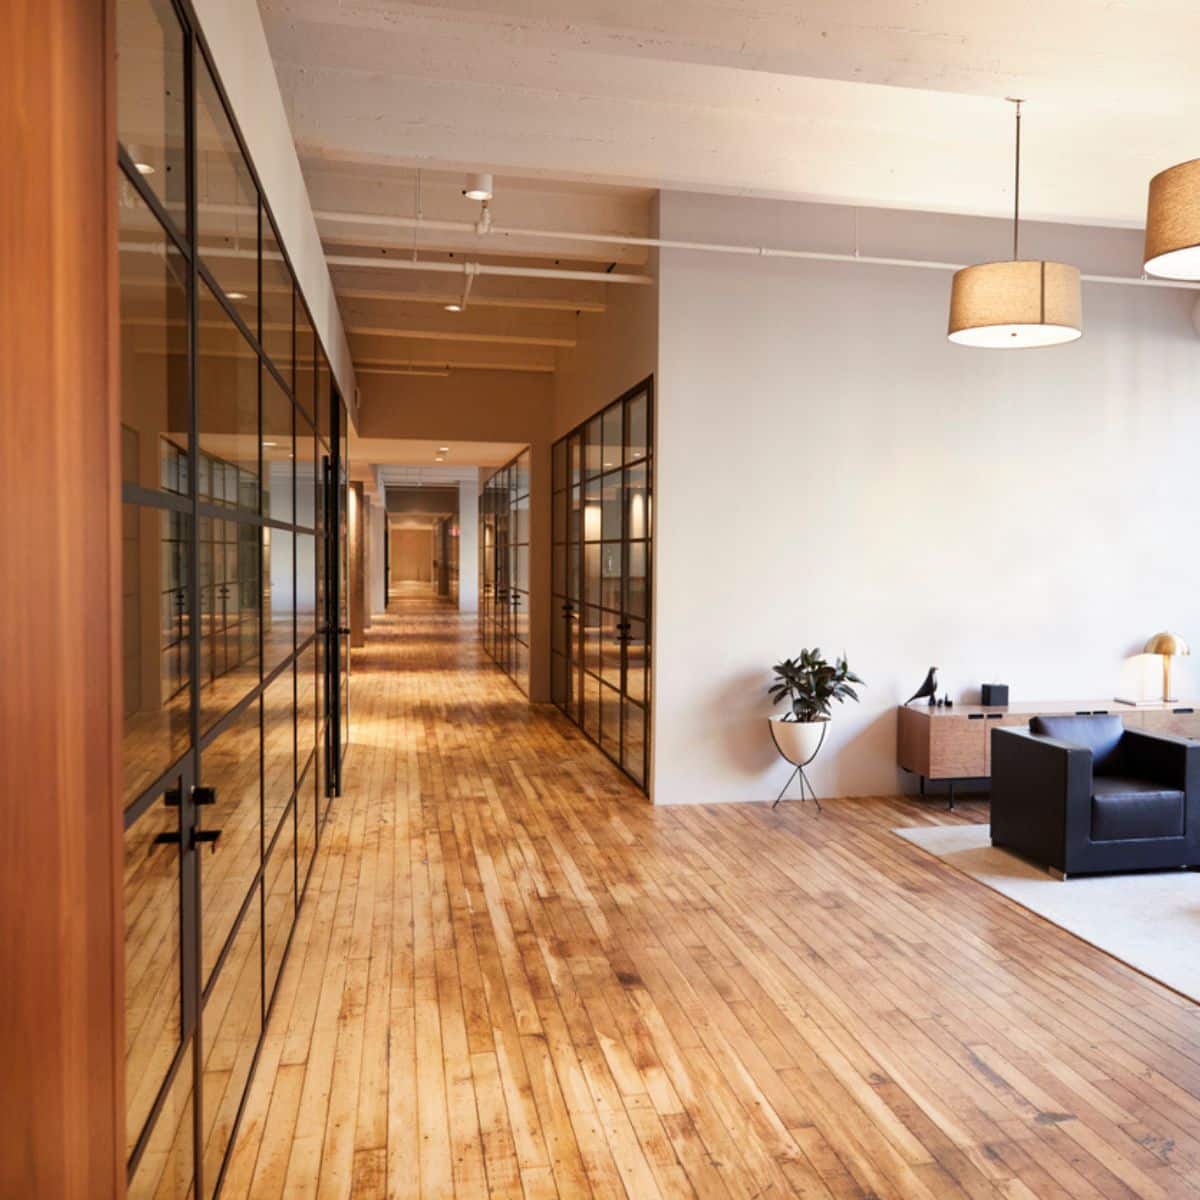 A large hallway with wooden floors and doors with mirrors